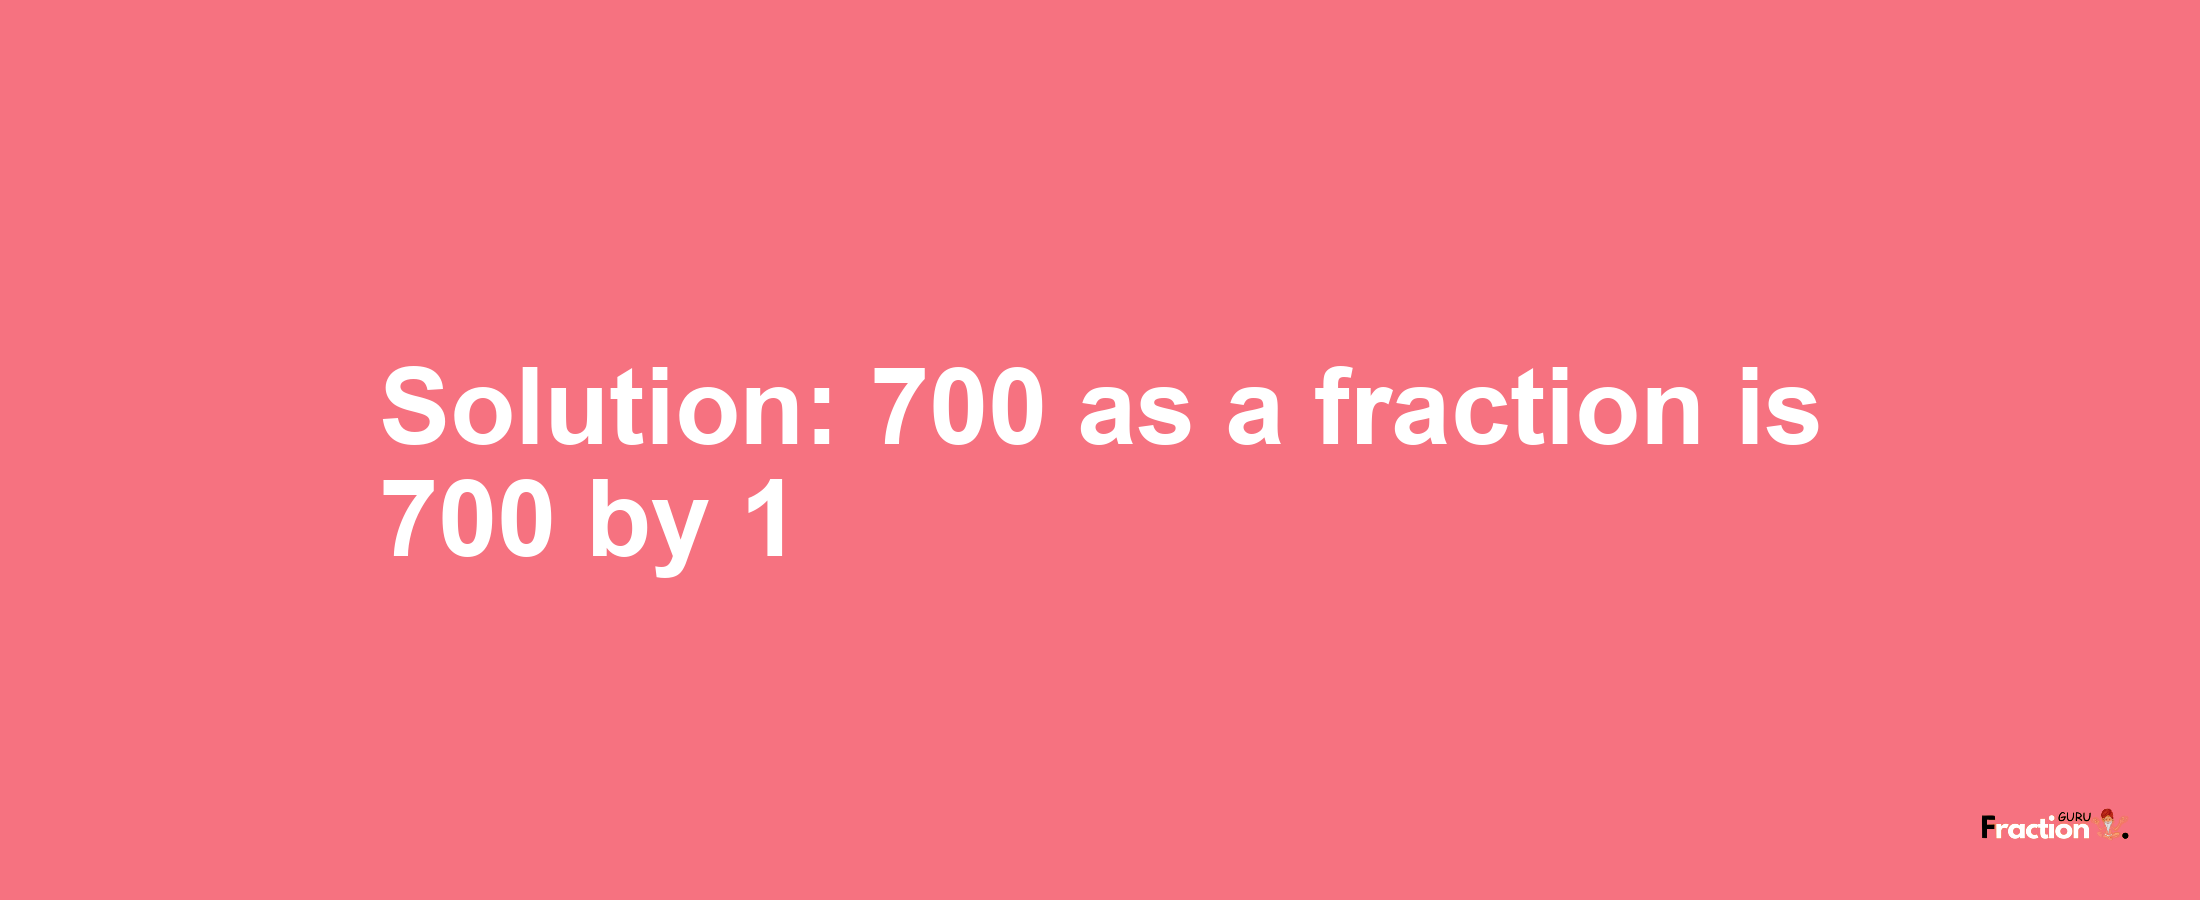 Solution:700 as a fraction is 700/1